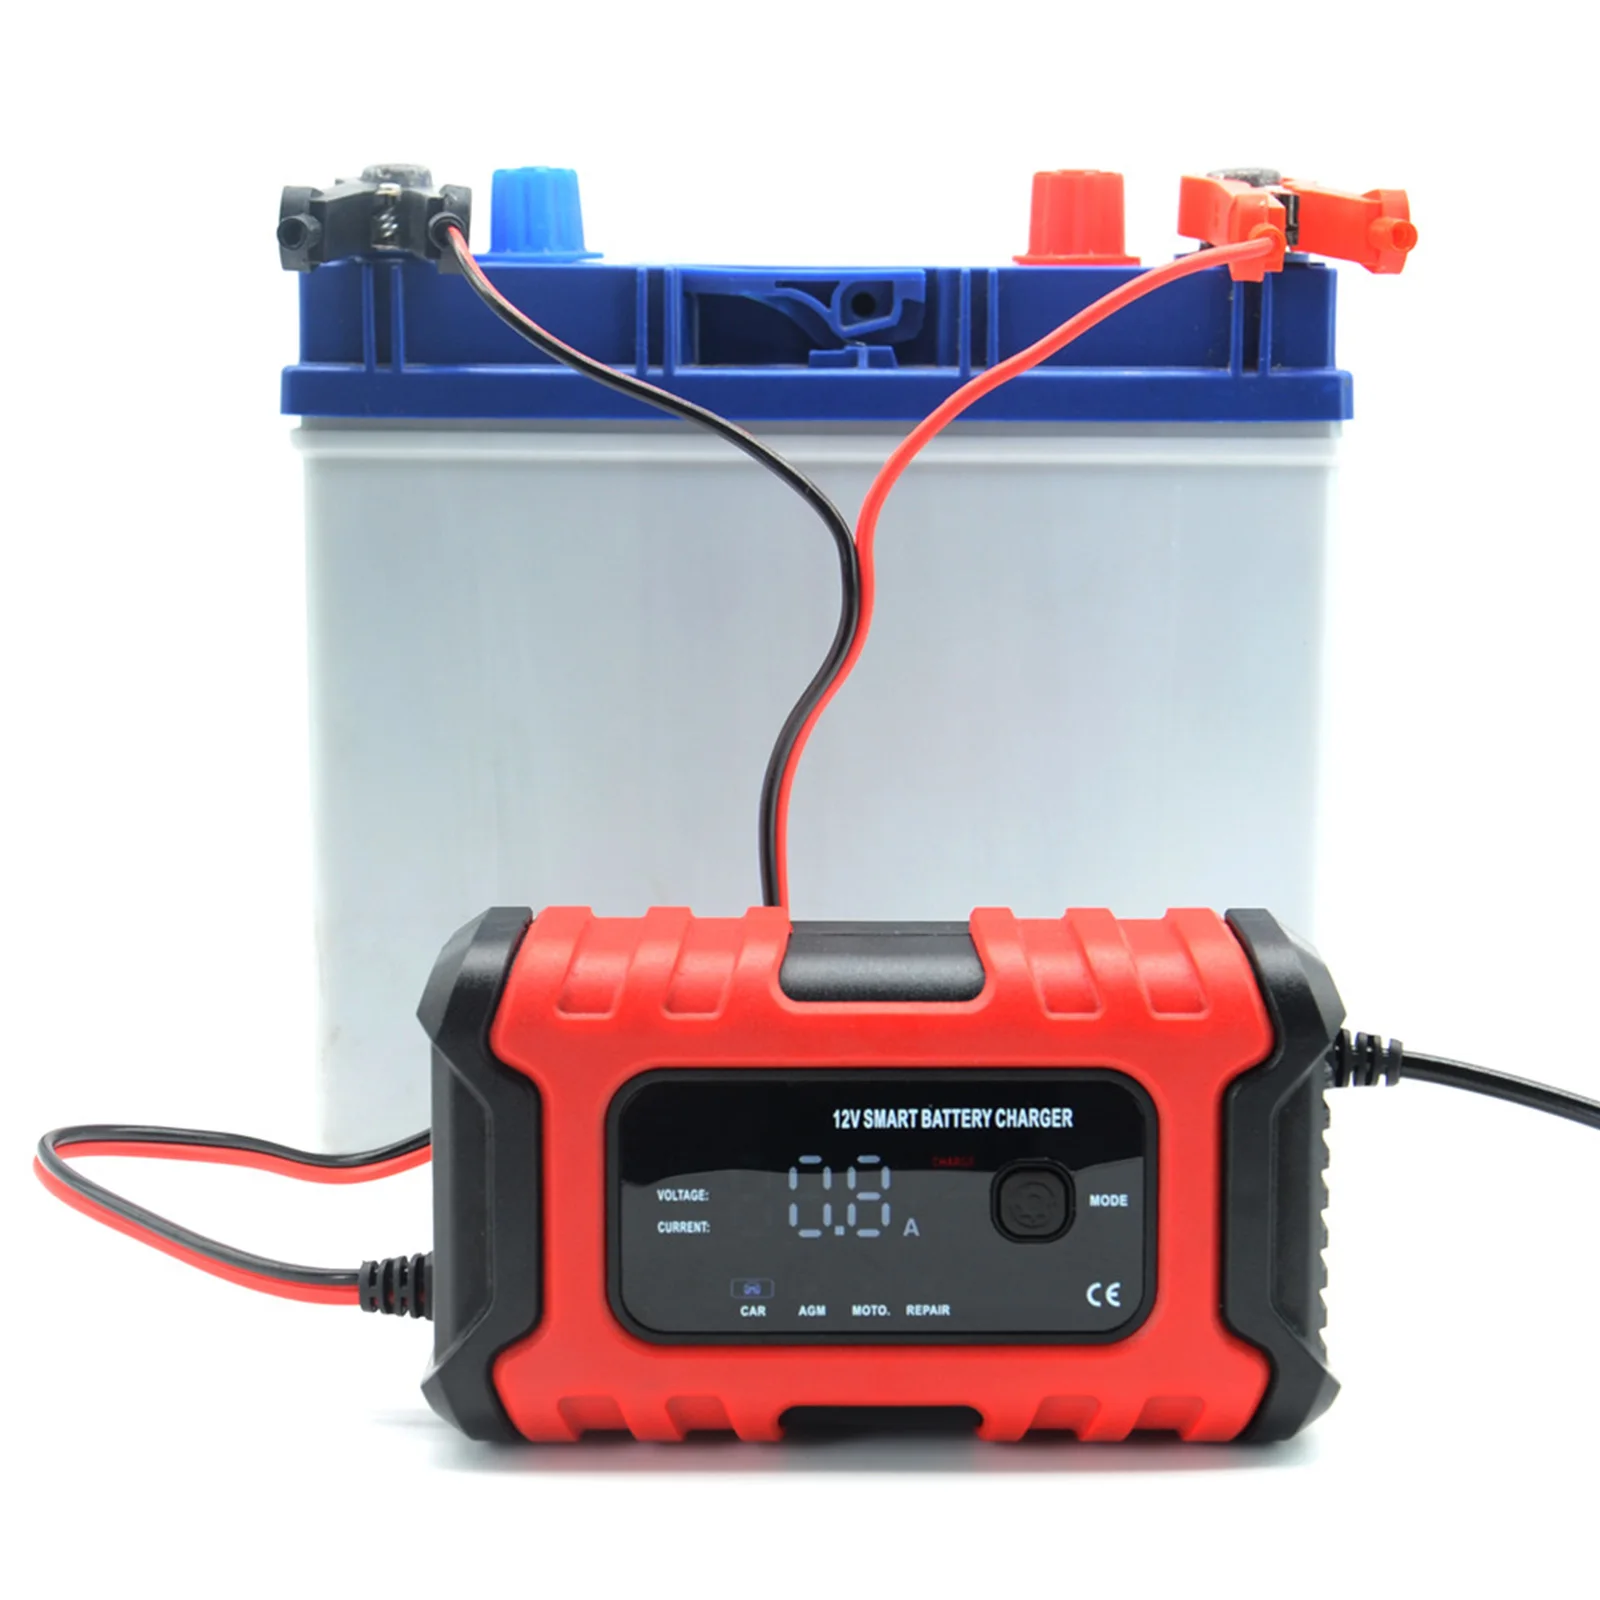 

12V 6A Smart Car Battery Charger Fully Automatic Motorcycle Digital Repair Charger for AGM GEL WET Lead Acid Battery US/UK/EU